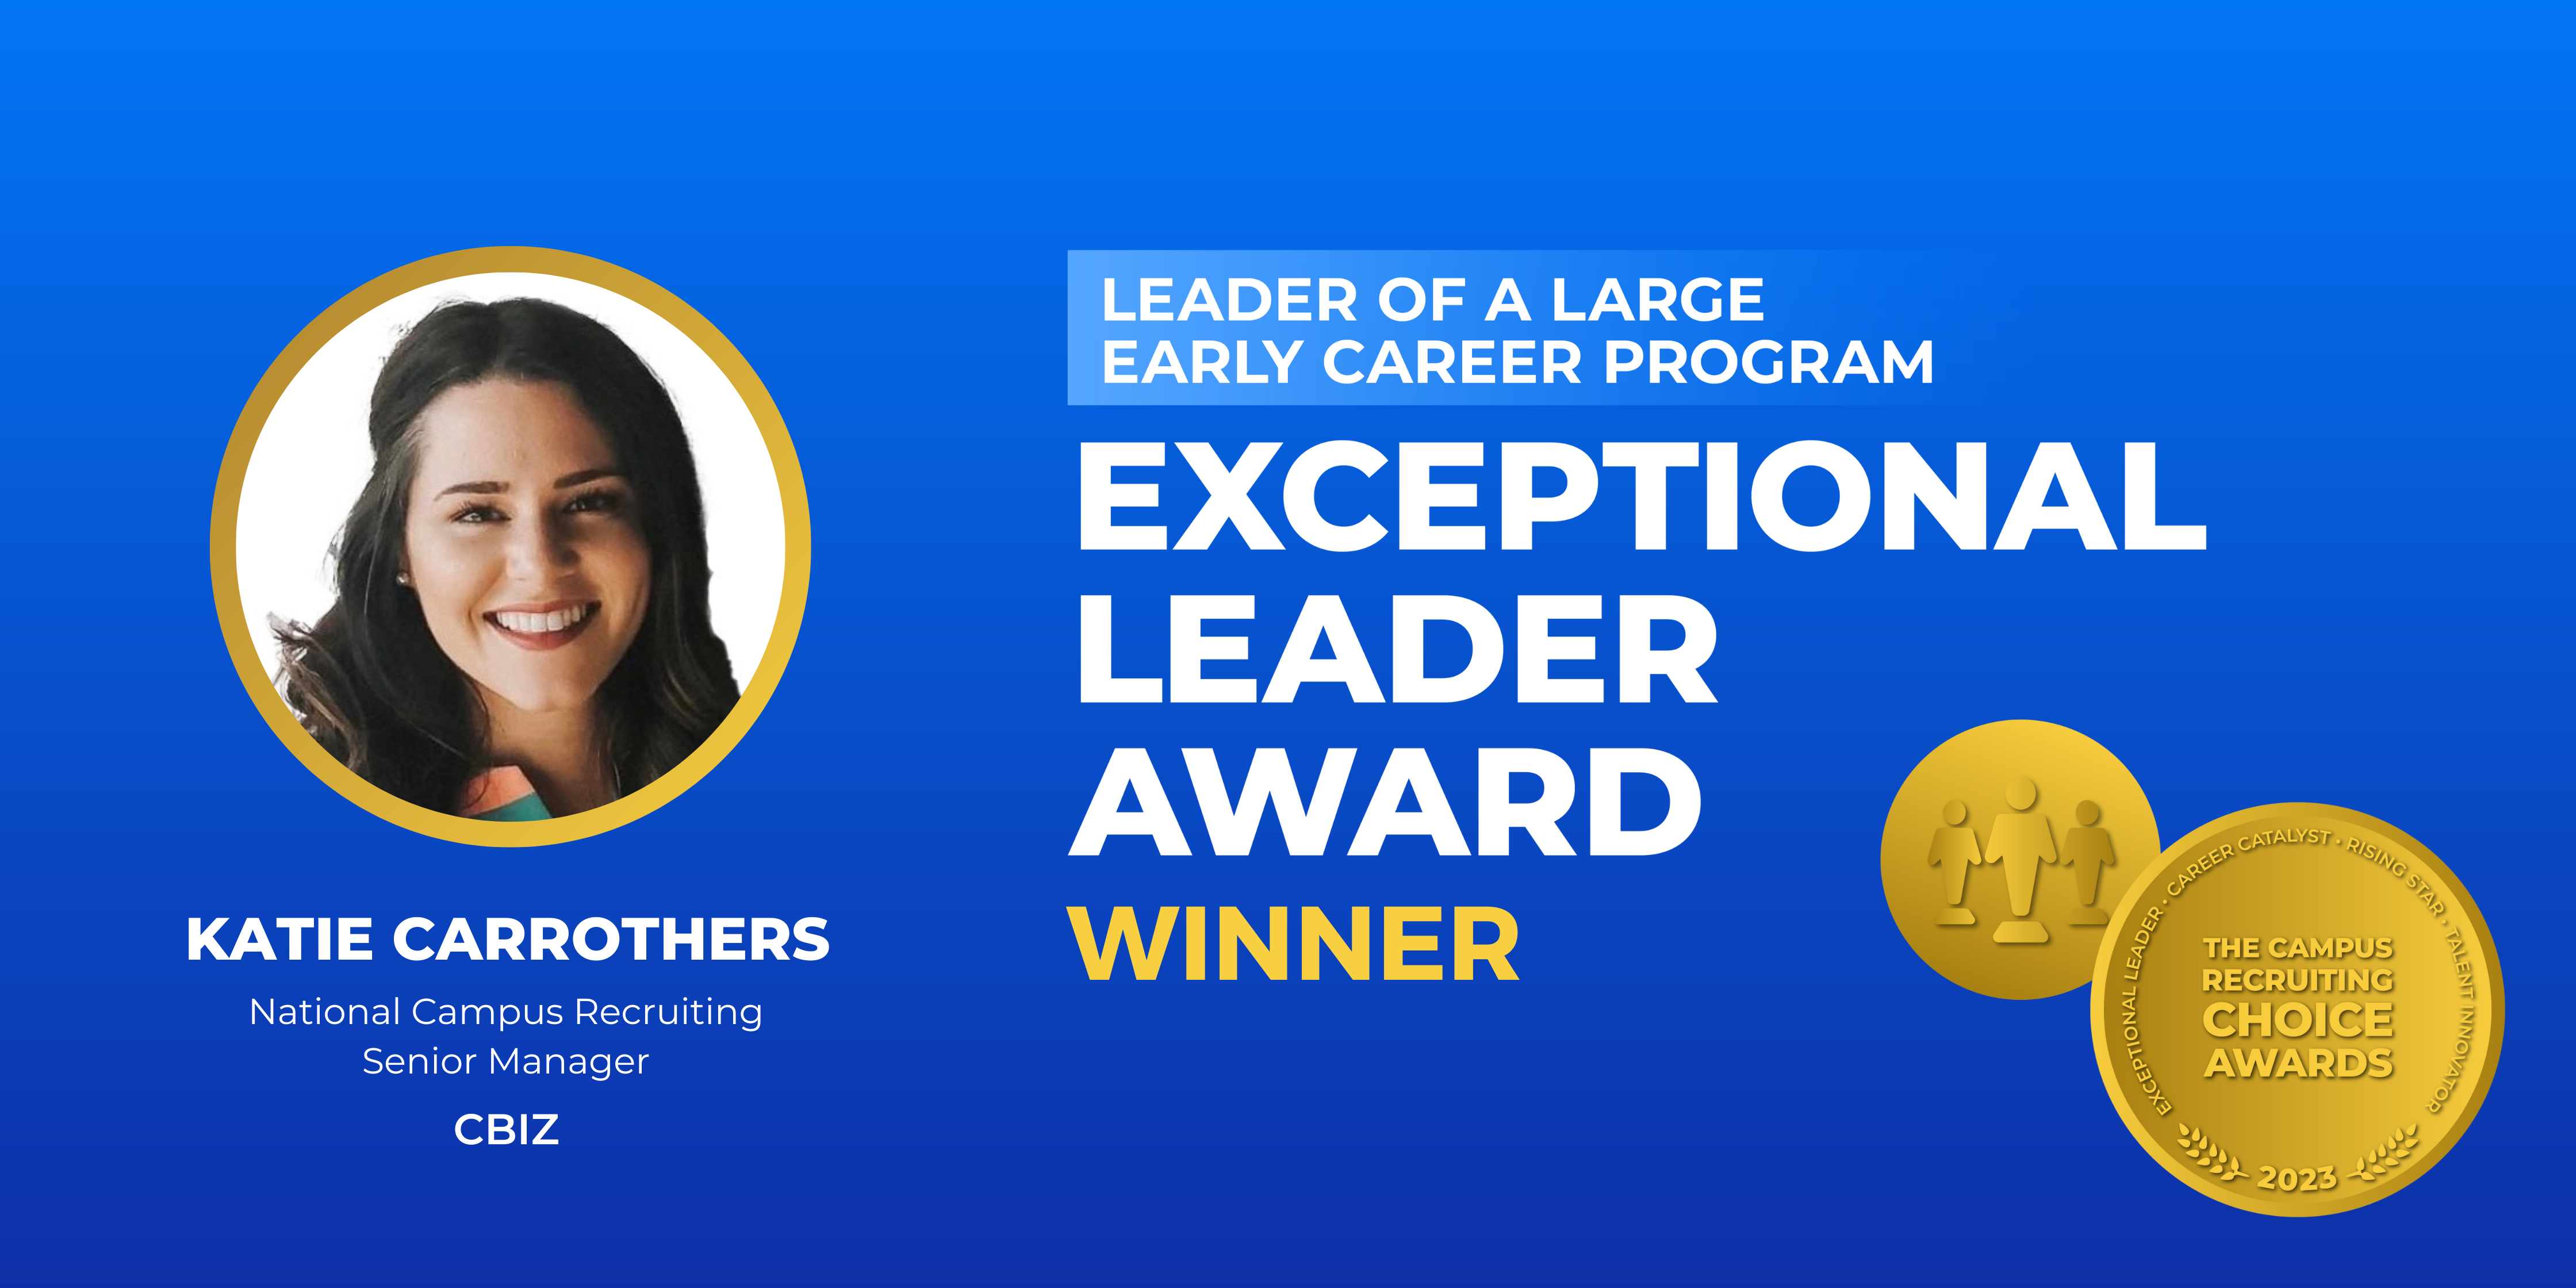 EXCEPTIONAL LEADER - Leader of a Large Early Career Program - Winner - Katie Carrothers